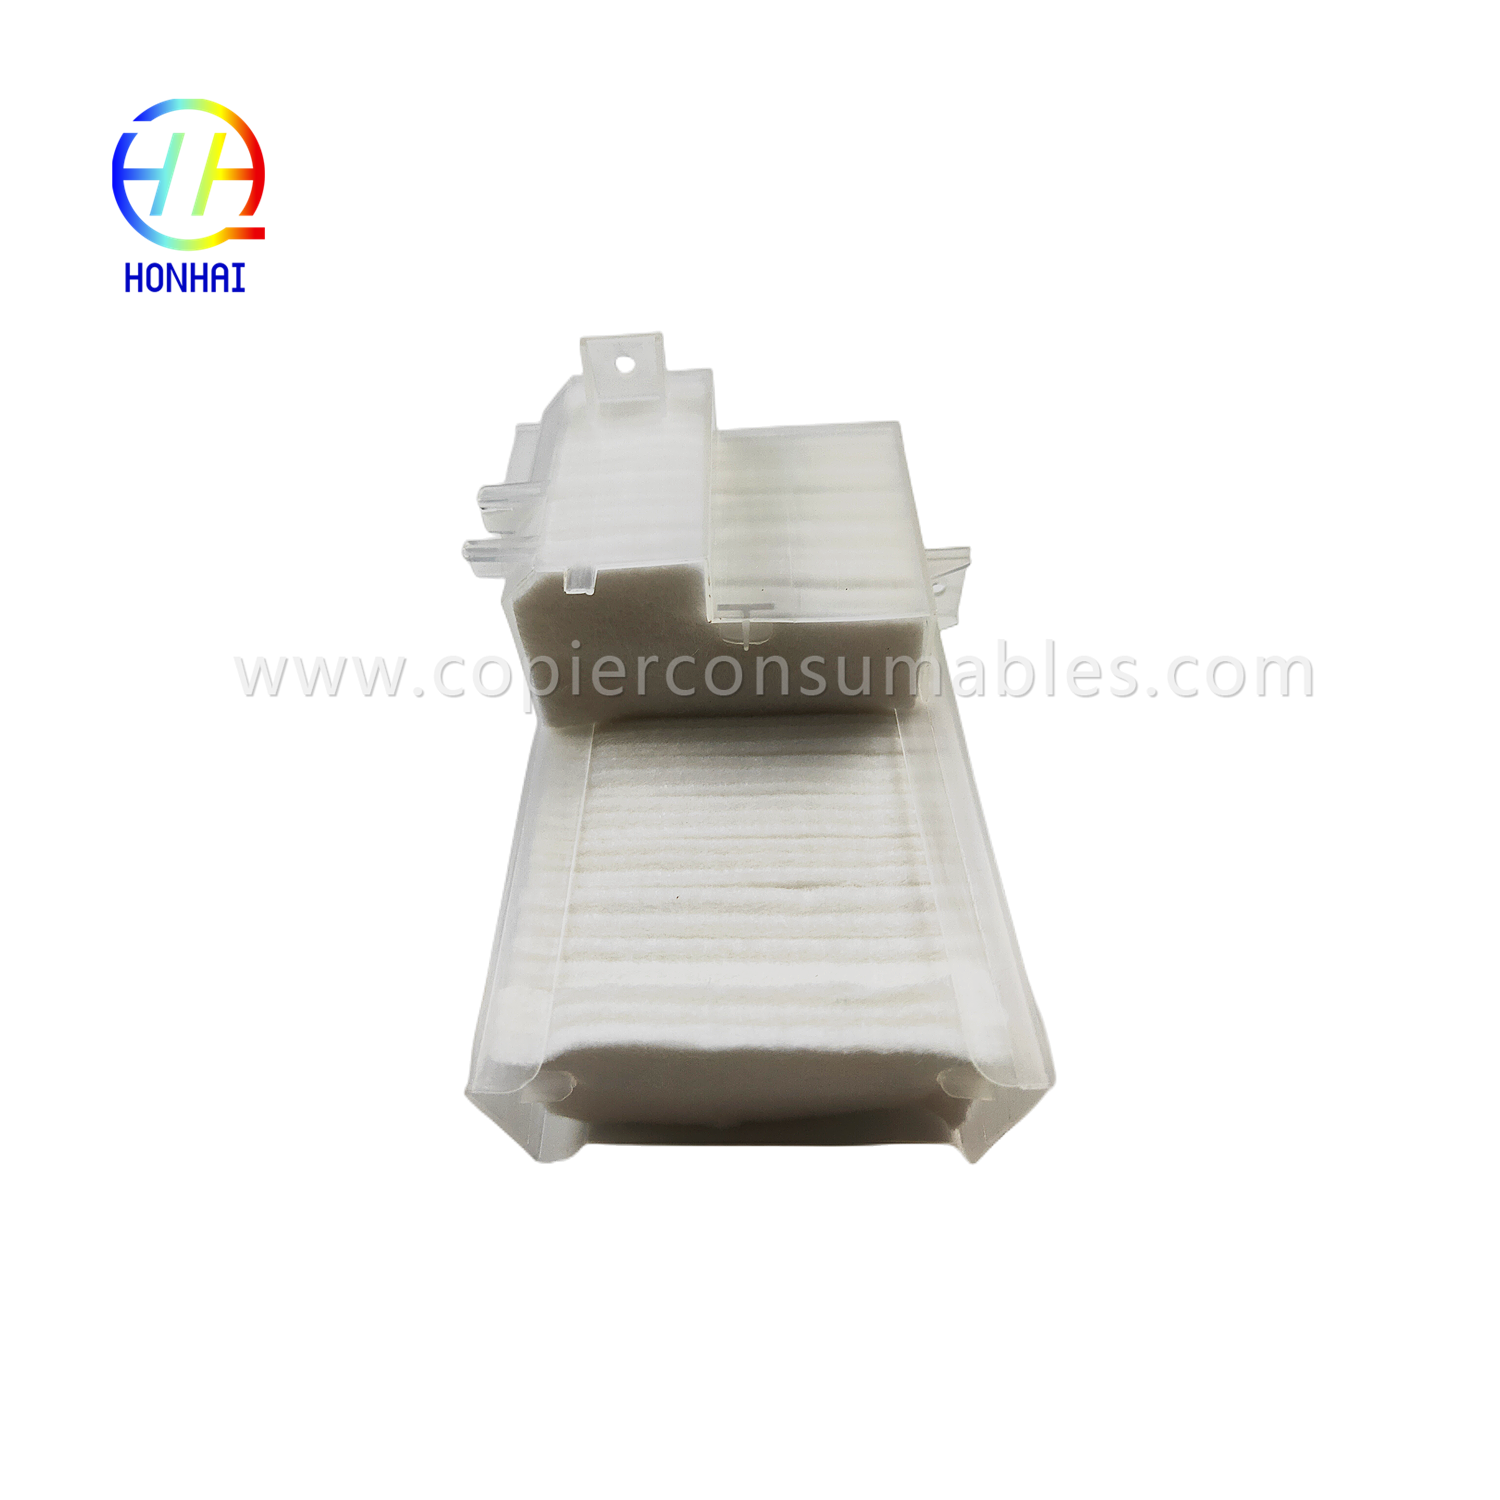 https://c585.goodao.net/waste-inktpad-for-epson-l800-l805-l810-l850-r280-r290-product/